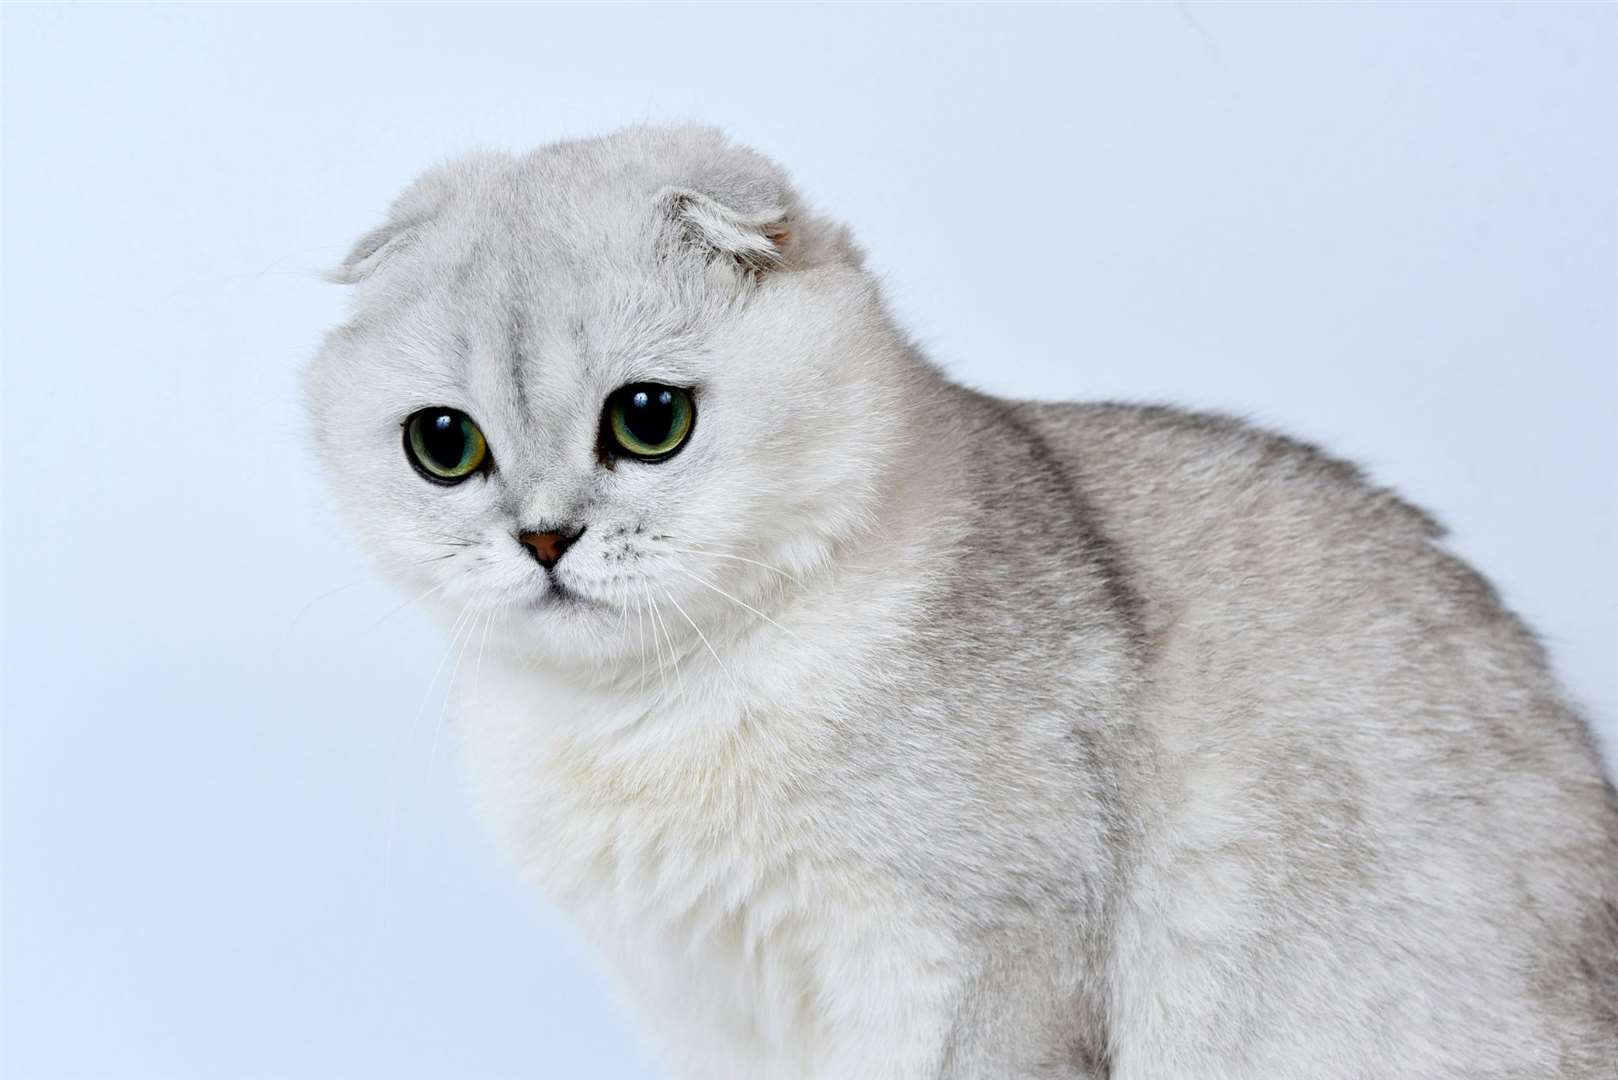 Animal charities have raised concerns over a new Hollywood film “glamourising” Scottish Fold cats. Picture: RSPCA